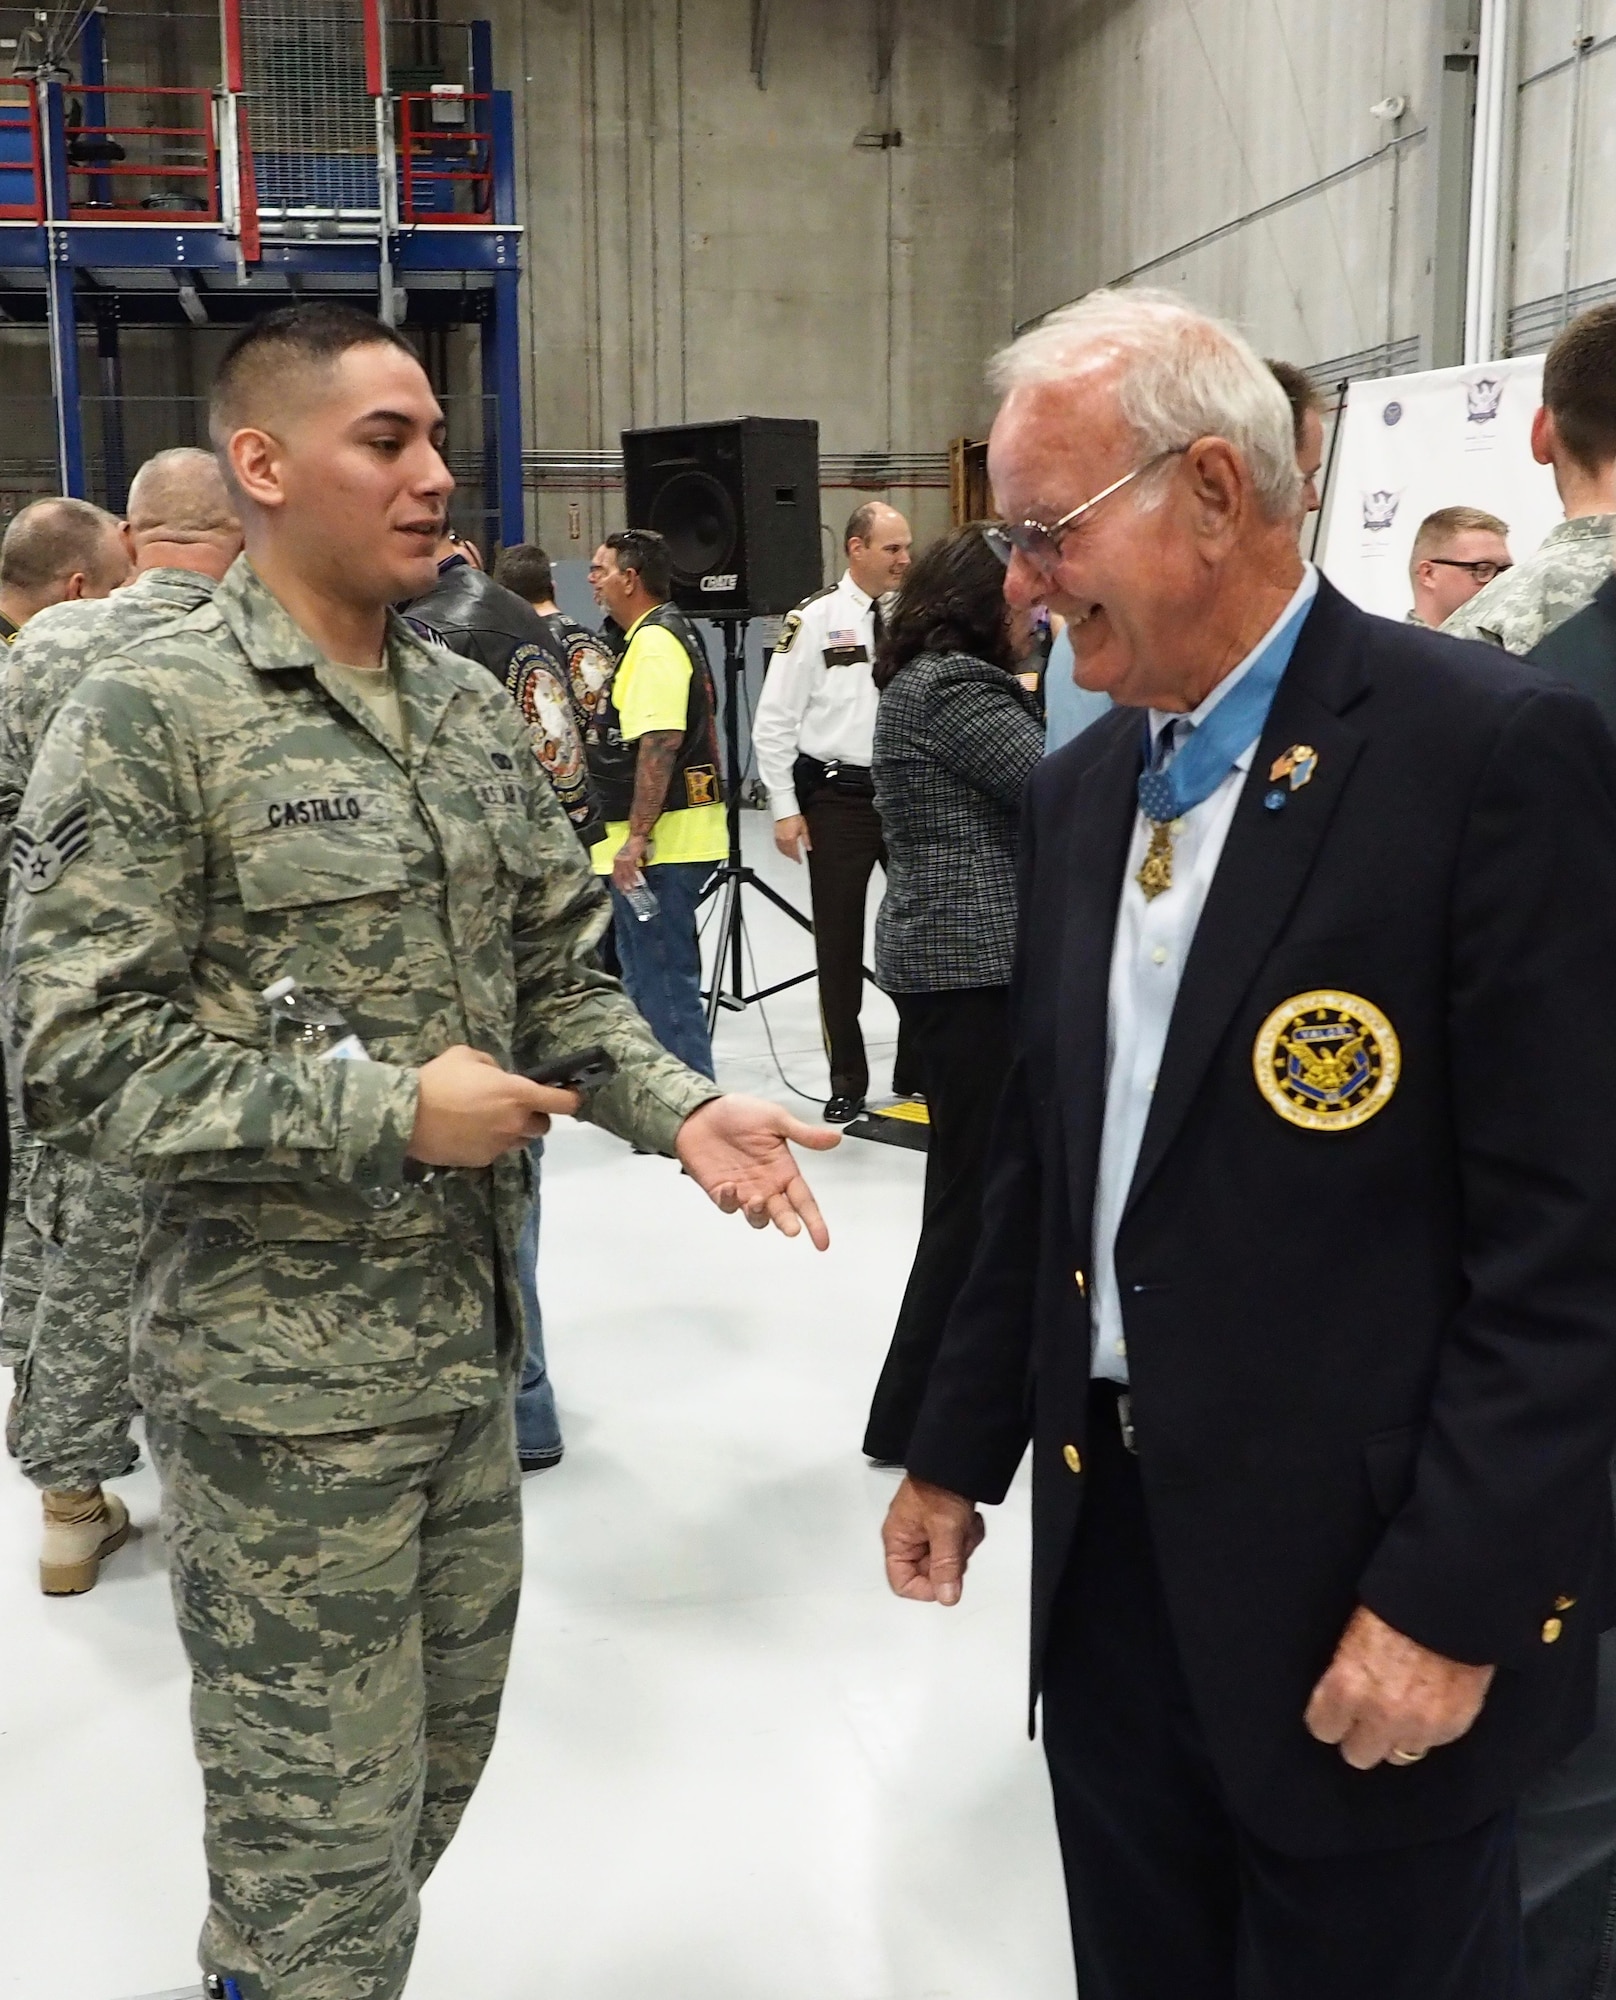 Senior Airman Raul Castillo, 934th Security Forces Squadron, talks with Medal of Honor recipient Robert Patterson. (Air Force Photo/Paul Zadach)